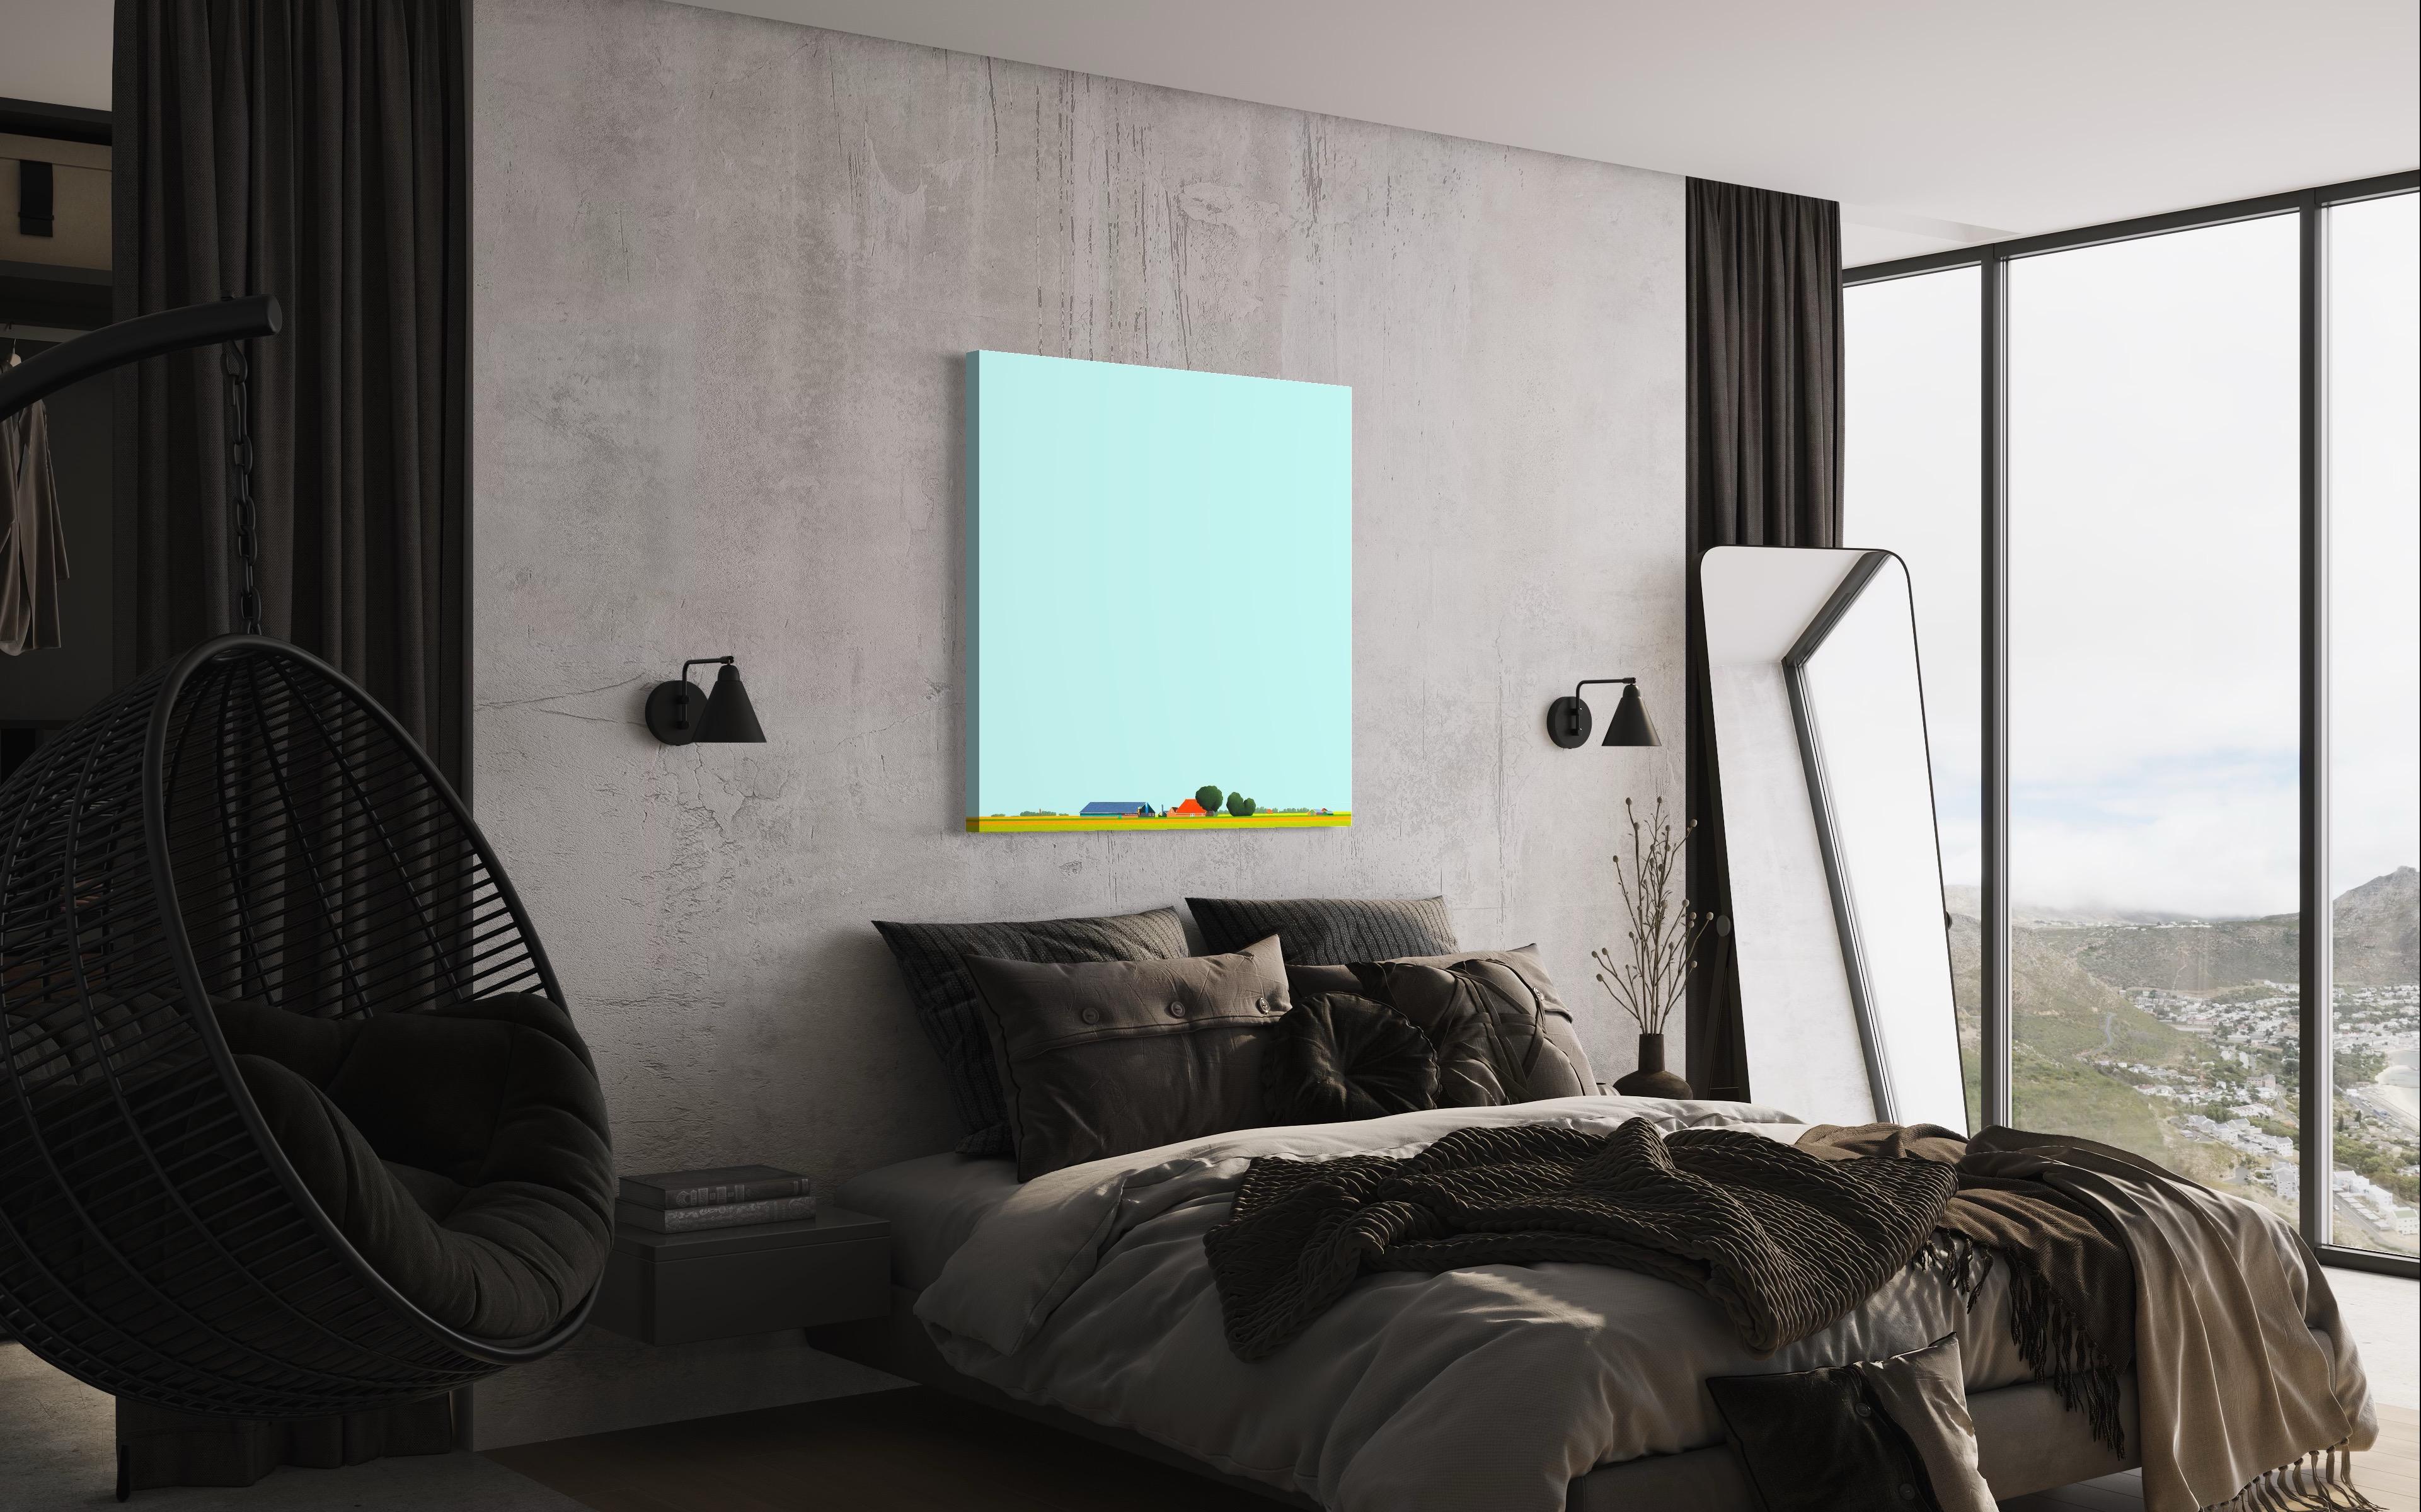 This beautiful landscape painting by Jeroen Allart is part of his minimalist landscape painting he did in his home country the Netherlands.

A farm stands before you on the horizon. A windmill majestically slices the blue sky. A bird, painted in